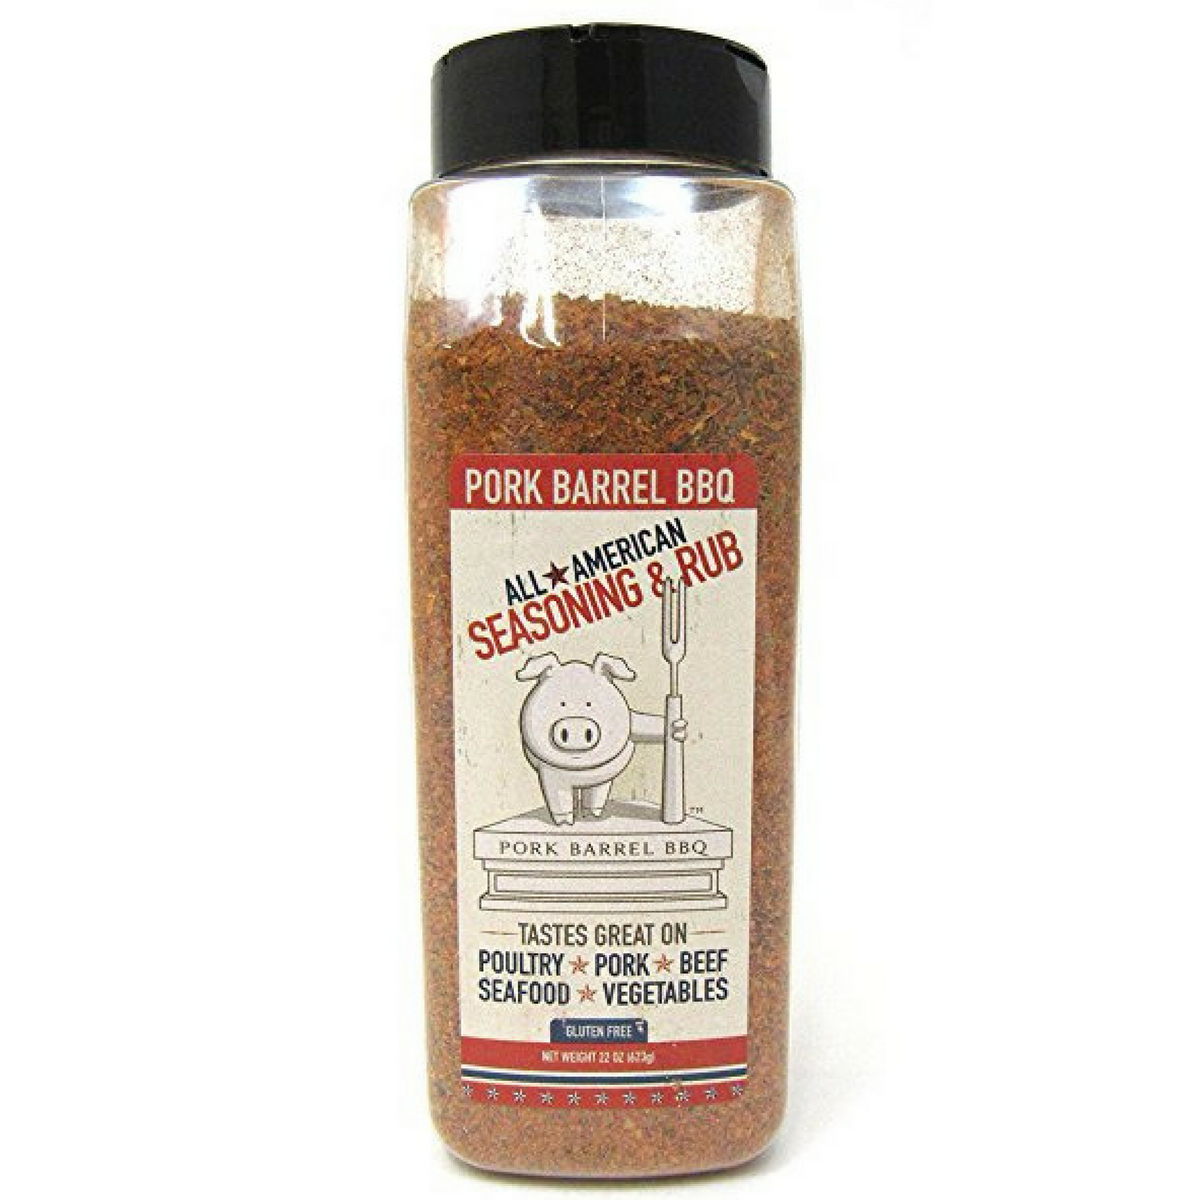 BBQ Spice and Grill Seasoning Gift Set - The Spice House